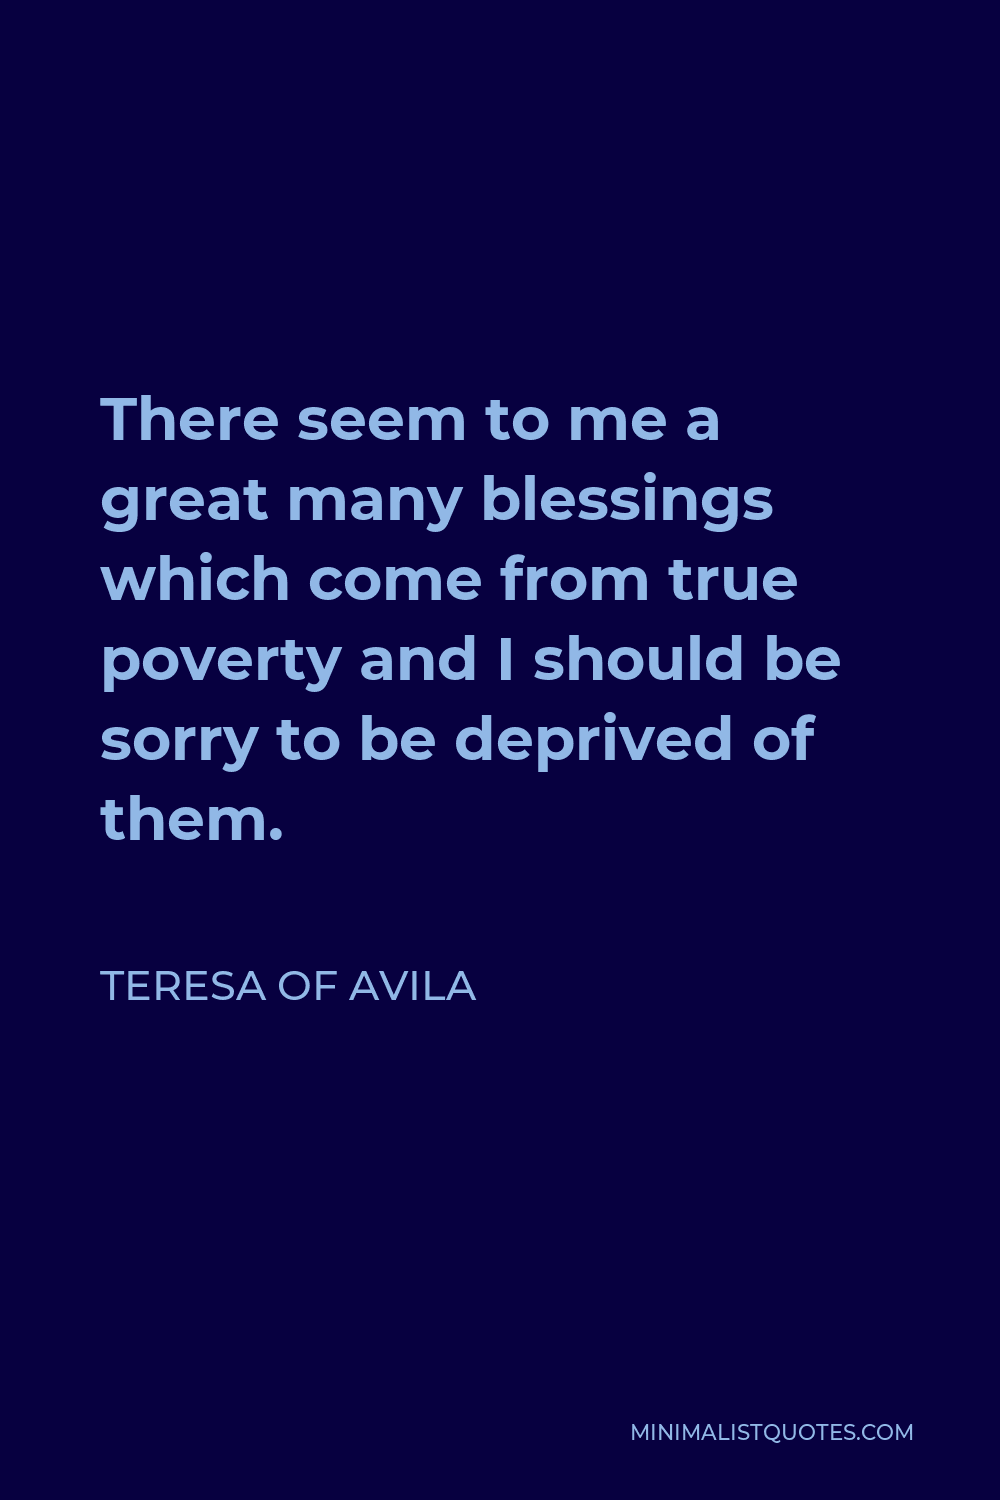 Teresa of Avila Quote - There seem to me a great many blessings which come from true poverty and I should be sorry to be deprived of them.